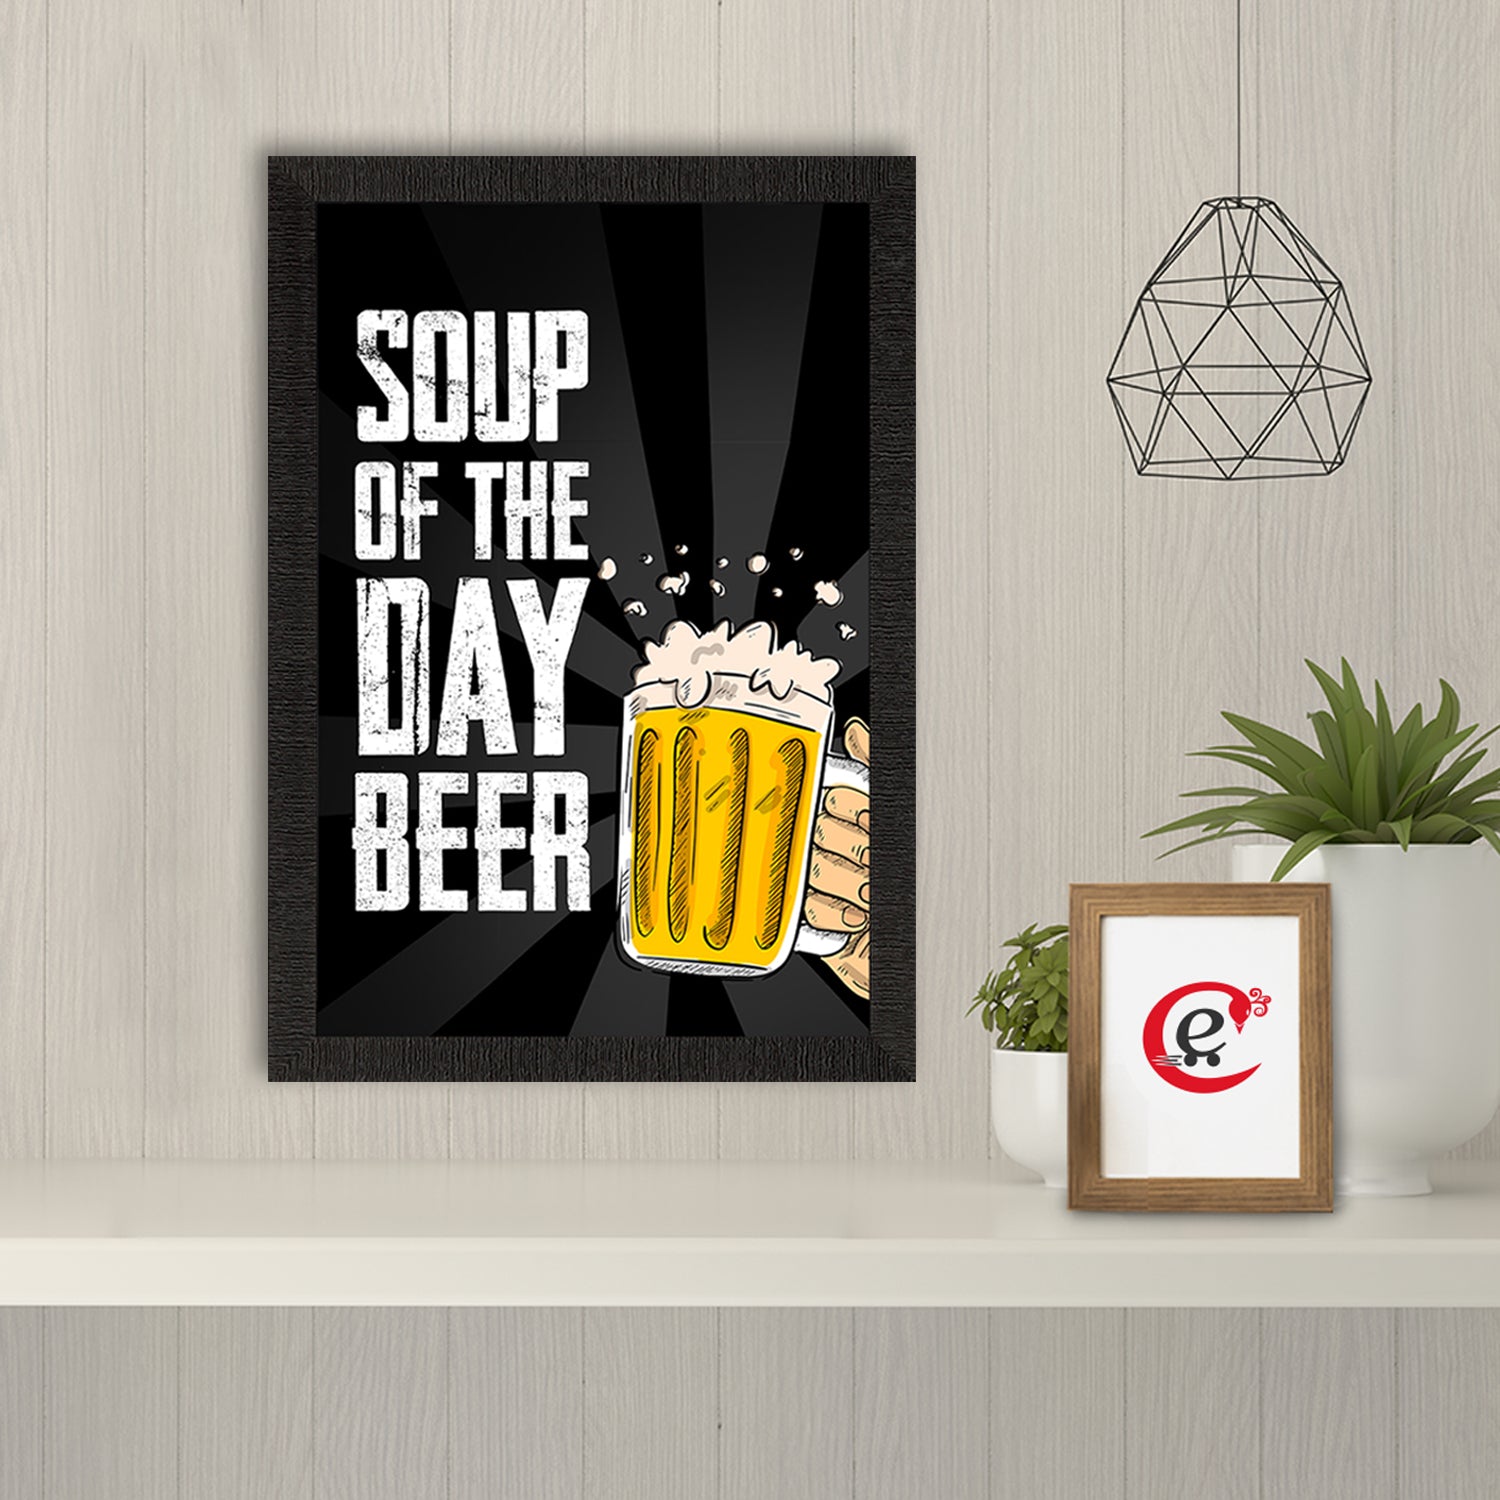 "Soup of the Day - Beer" Quirky Quote Satin Matt Texture UV Art Painting 1